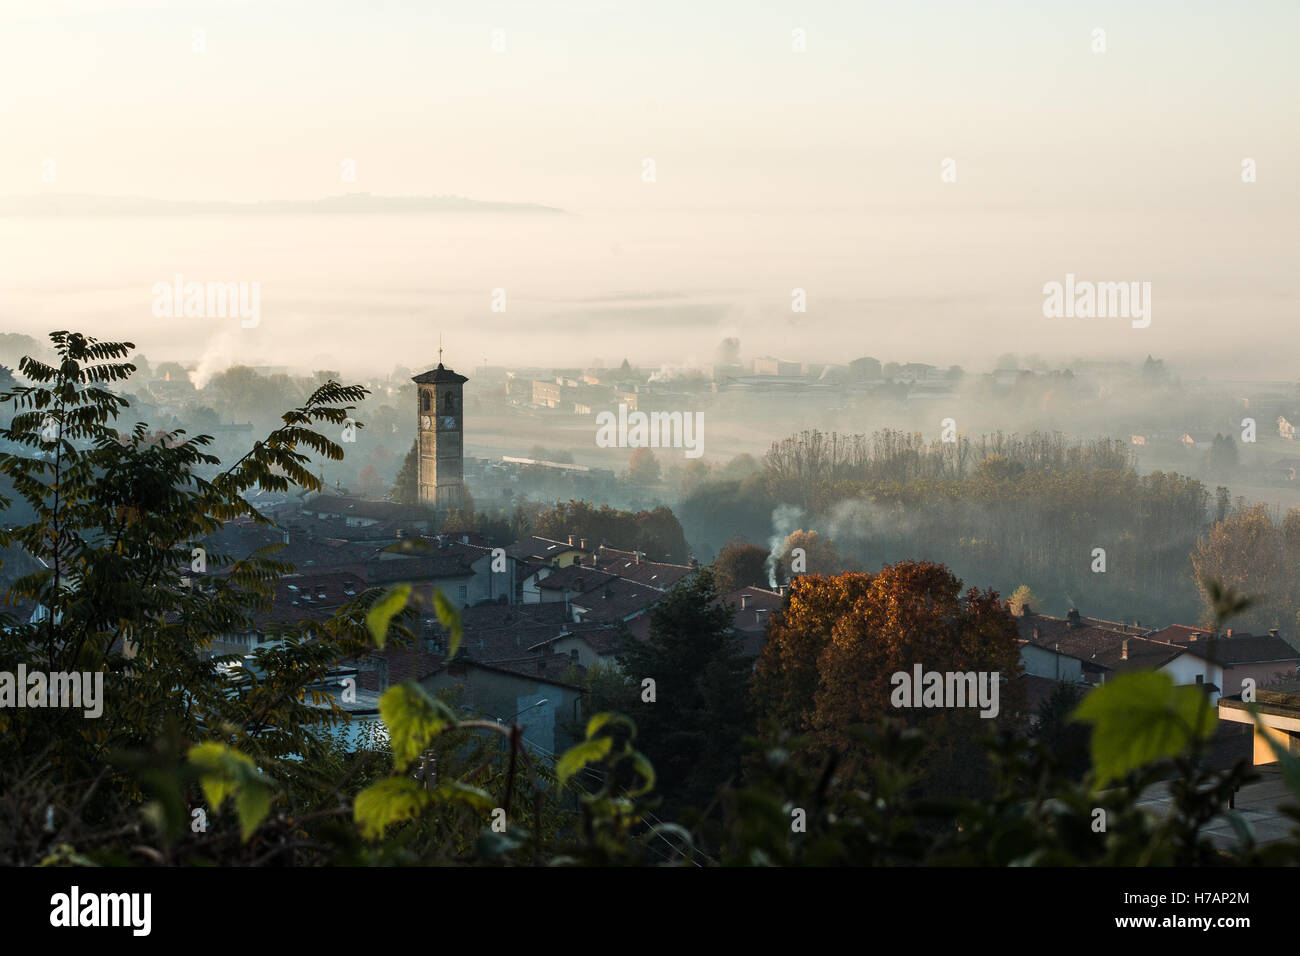 An autumn early morning fog above the town of Burolo di Ivrea in the Canavese area of the Piemonte region of Italy Stock Photo